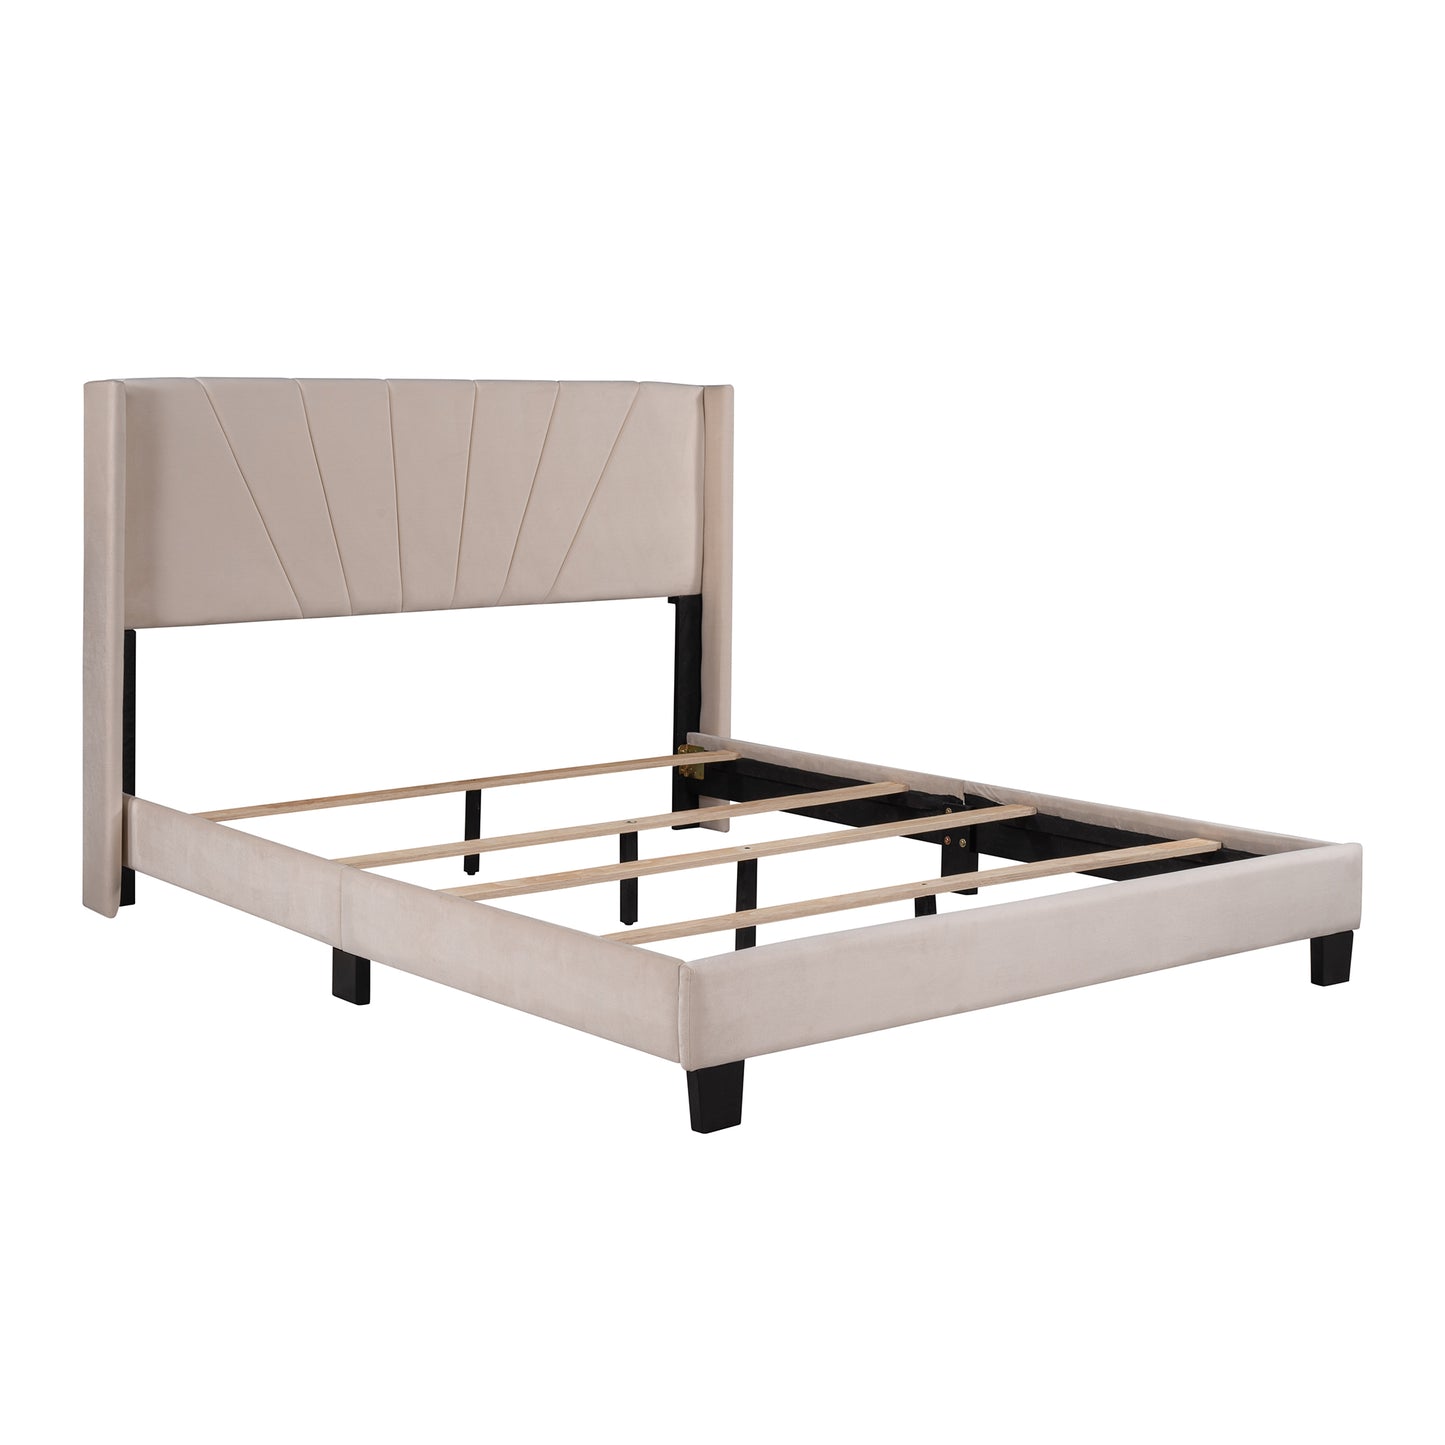 Syngar Velvet Upholstered Platform Bed Frame with Headboard, Queen Size Bed for Kids Teens Adults, Box Spring Needed, 500 LBS Load Capacity, Beige